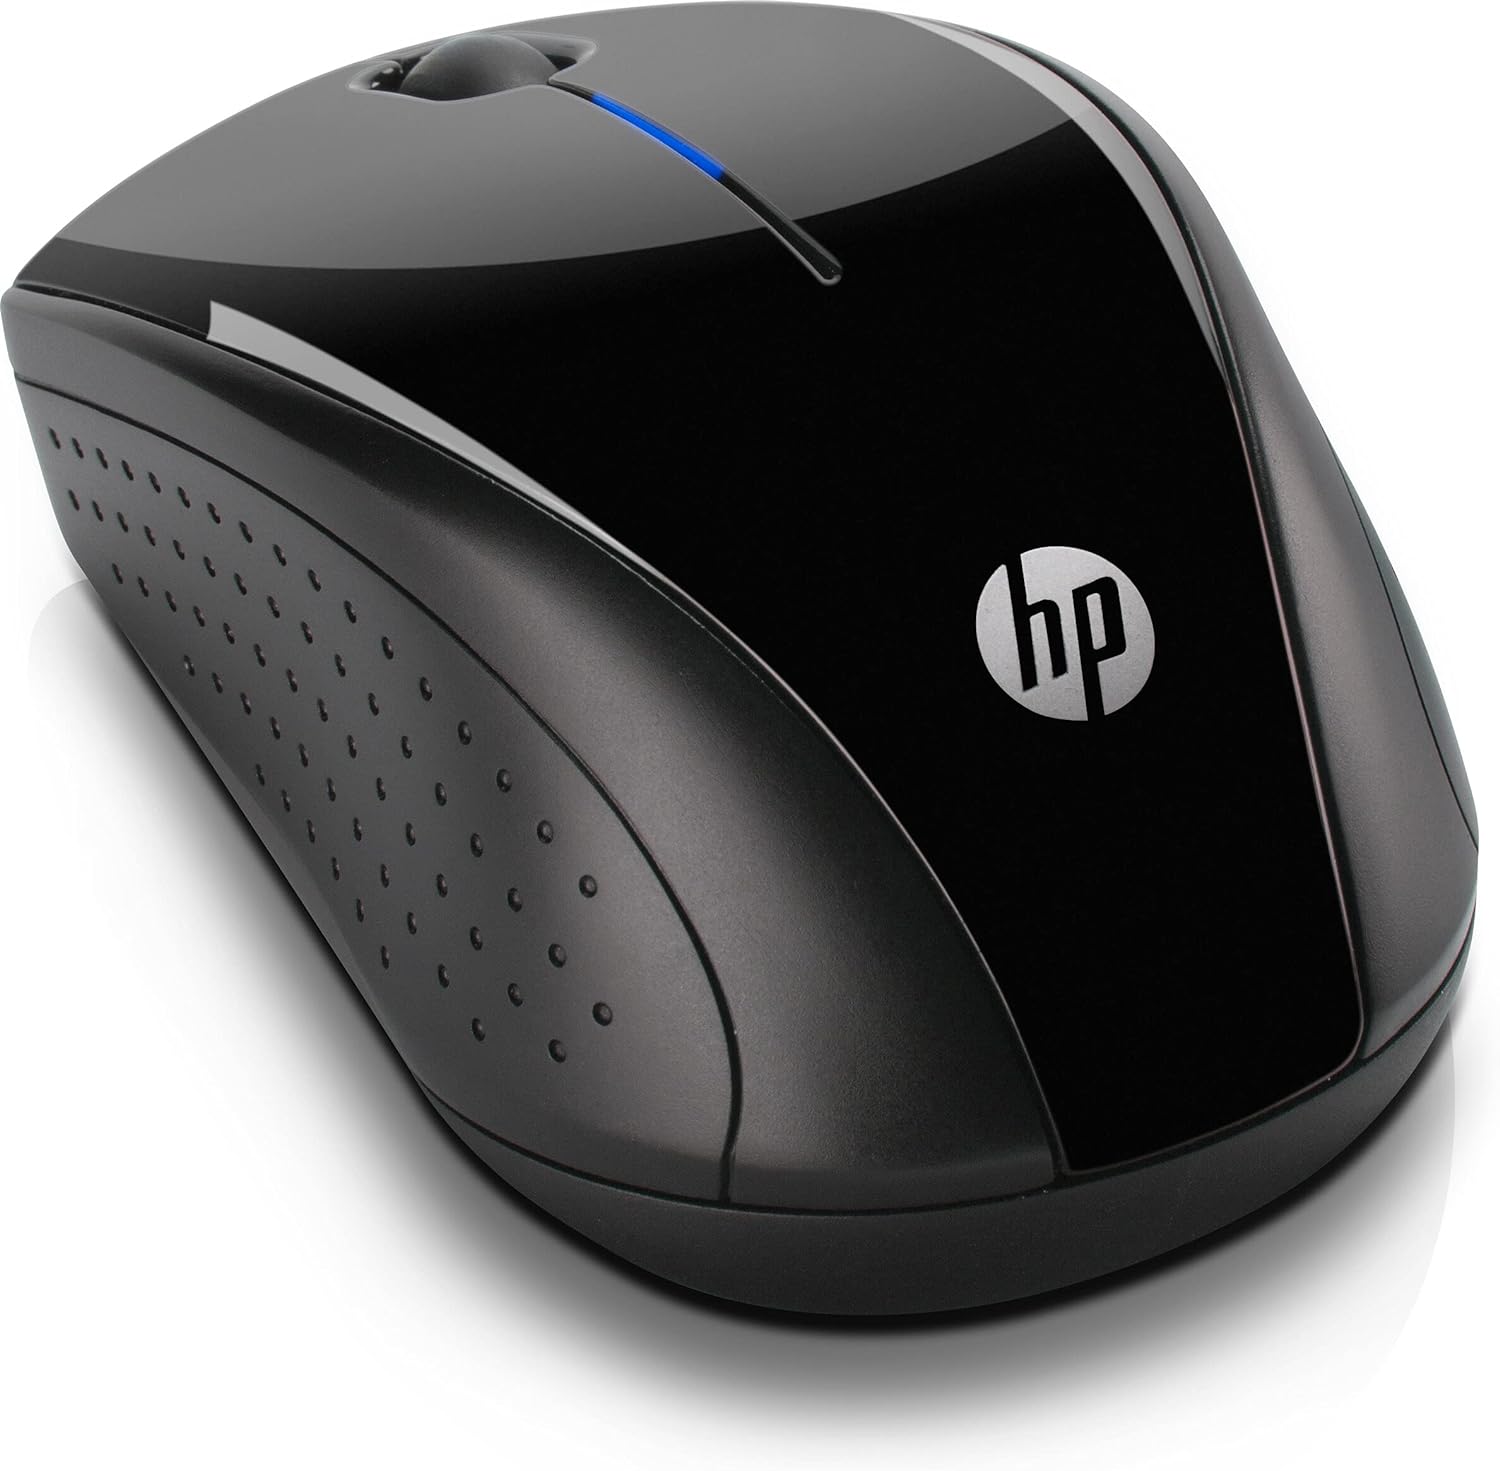 HP 220 Wireless Mouse, 2.4 GHz USB Dongle Connection, Blue LED technology, Up to 1600 DPI, 15-Month Battery, Up to 10M Connection, 2-Year Warranty, Multi Surface Tracking, Portable, Black - 3FV66AA